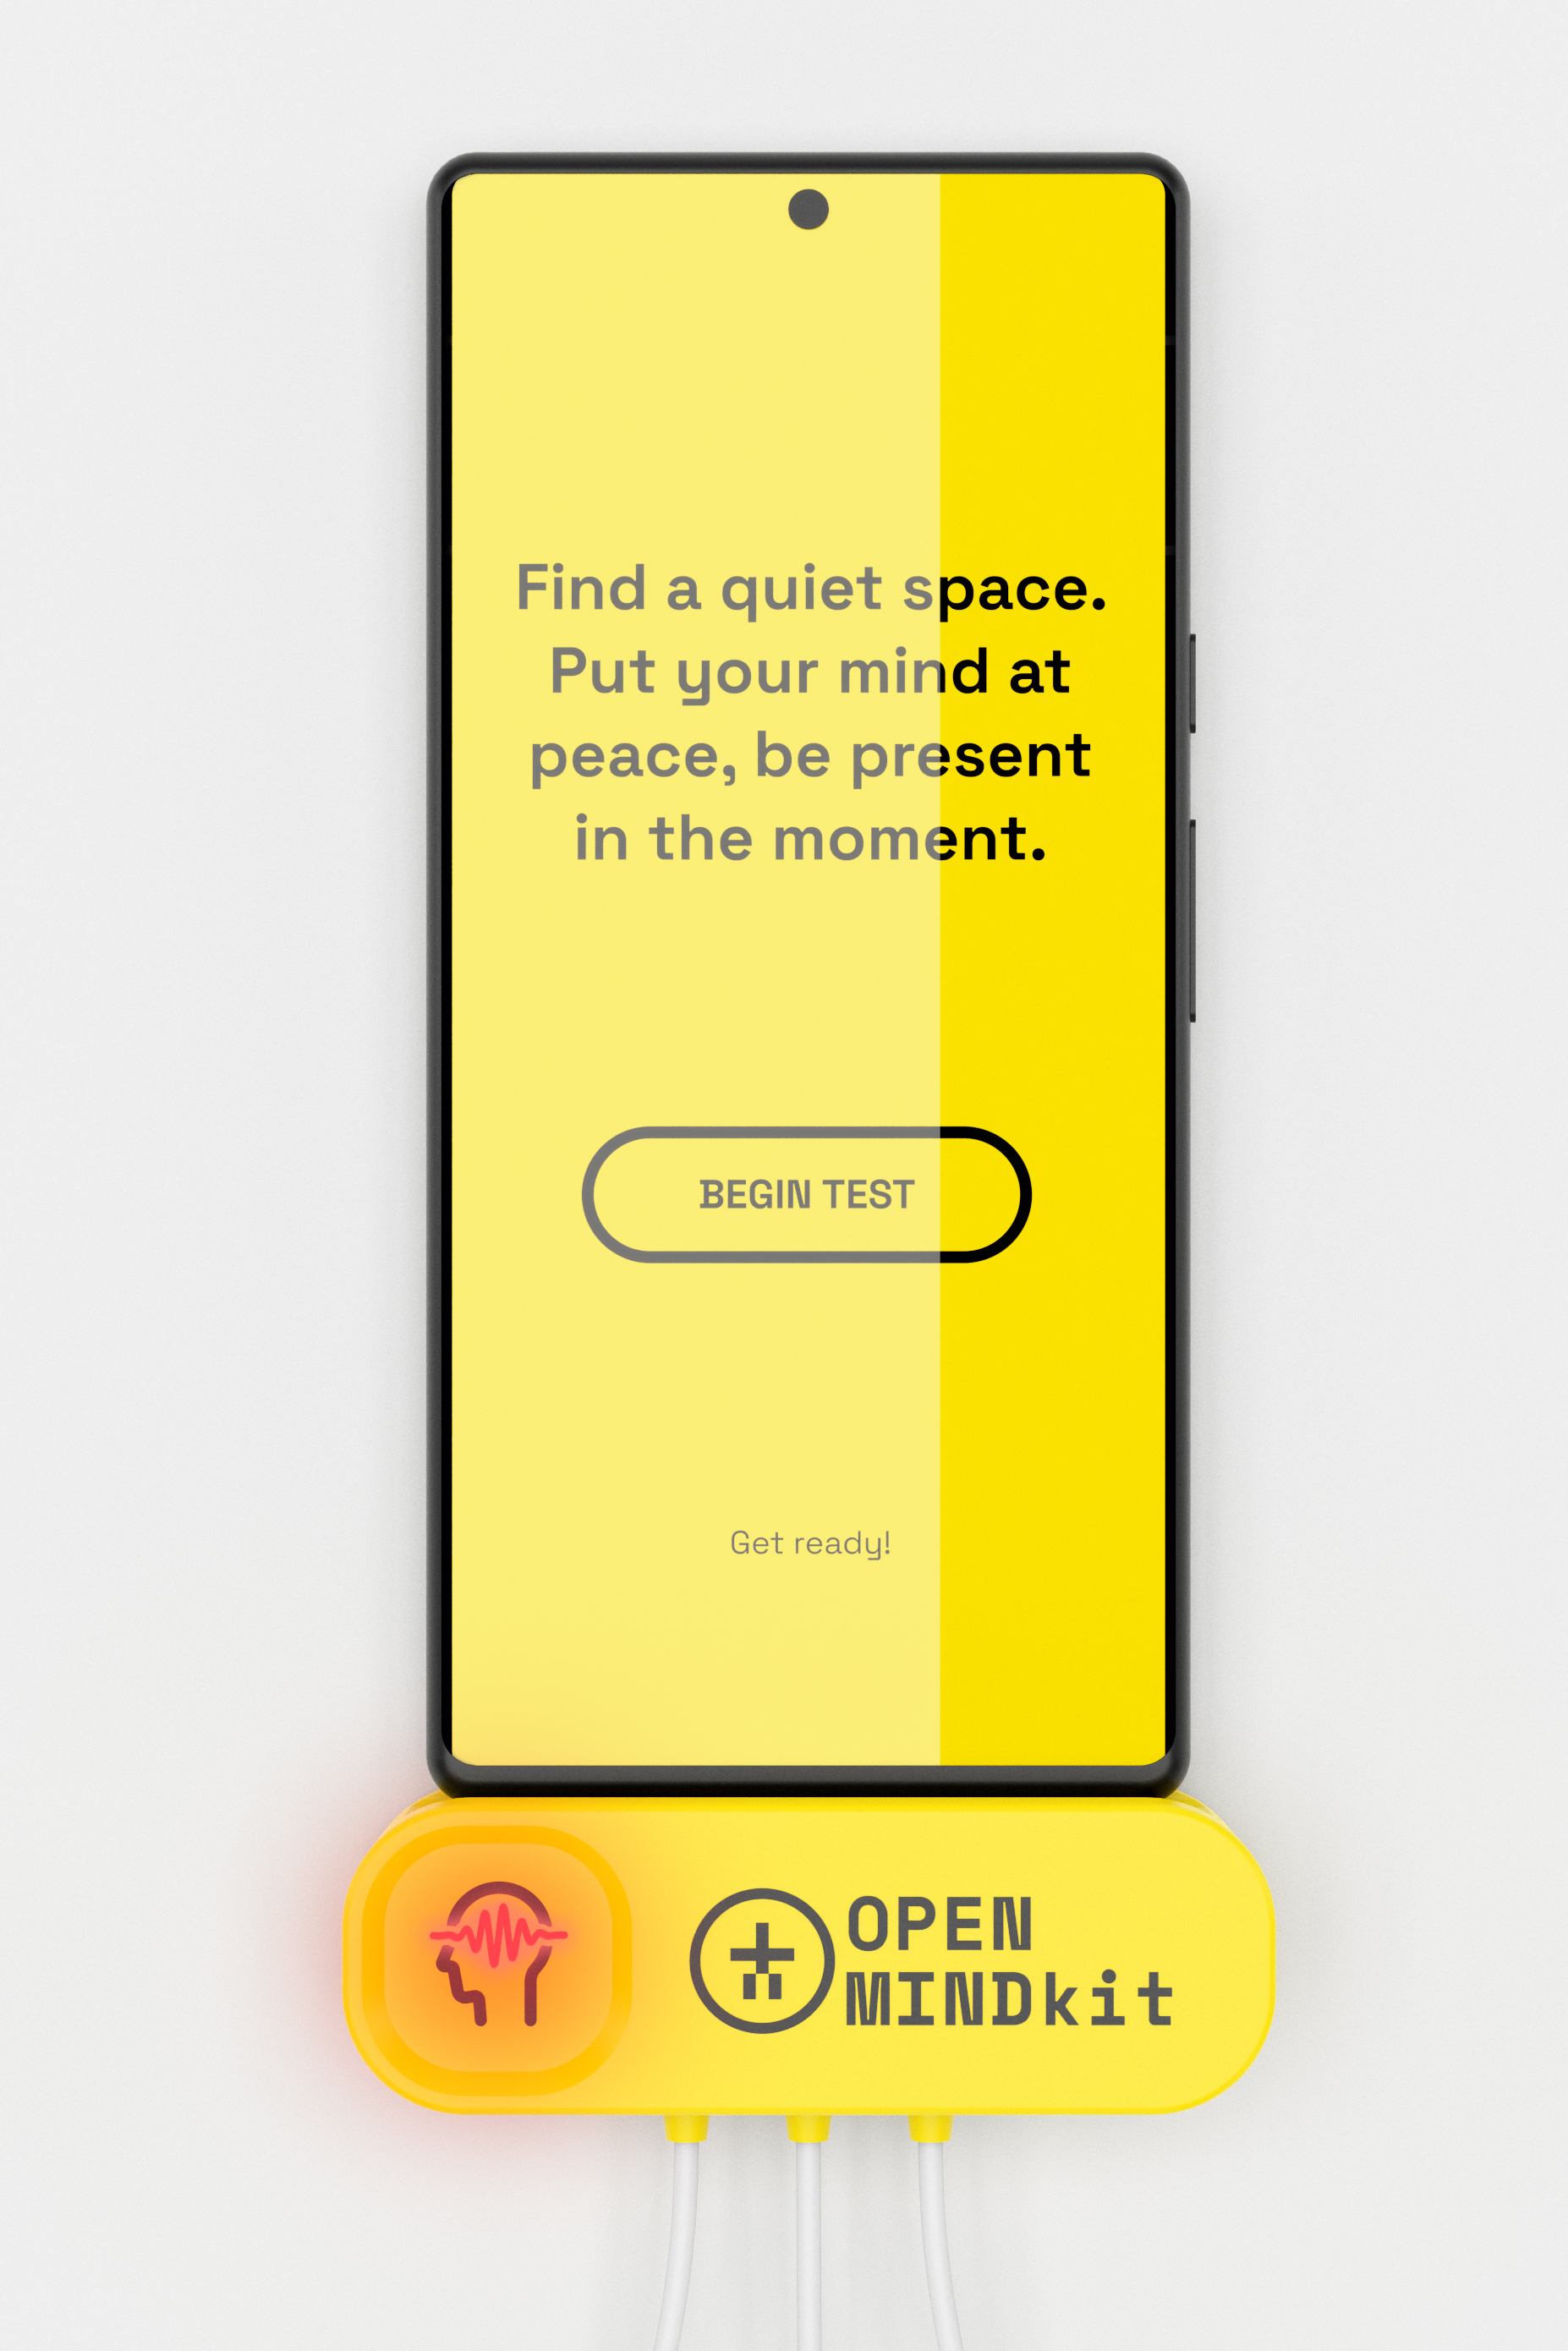 Open MINDkit – A self-treatment solution to restore your digital wellbeing